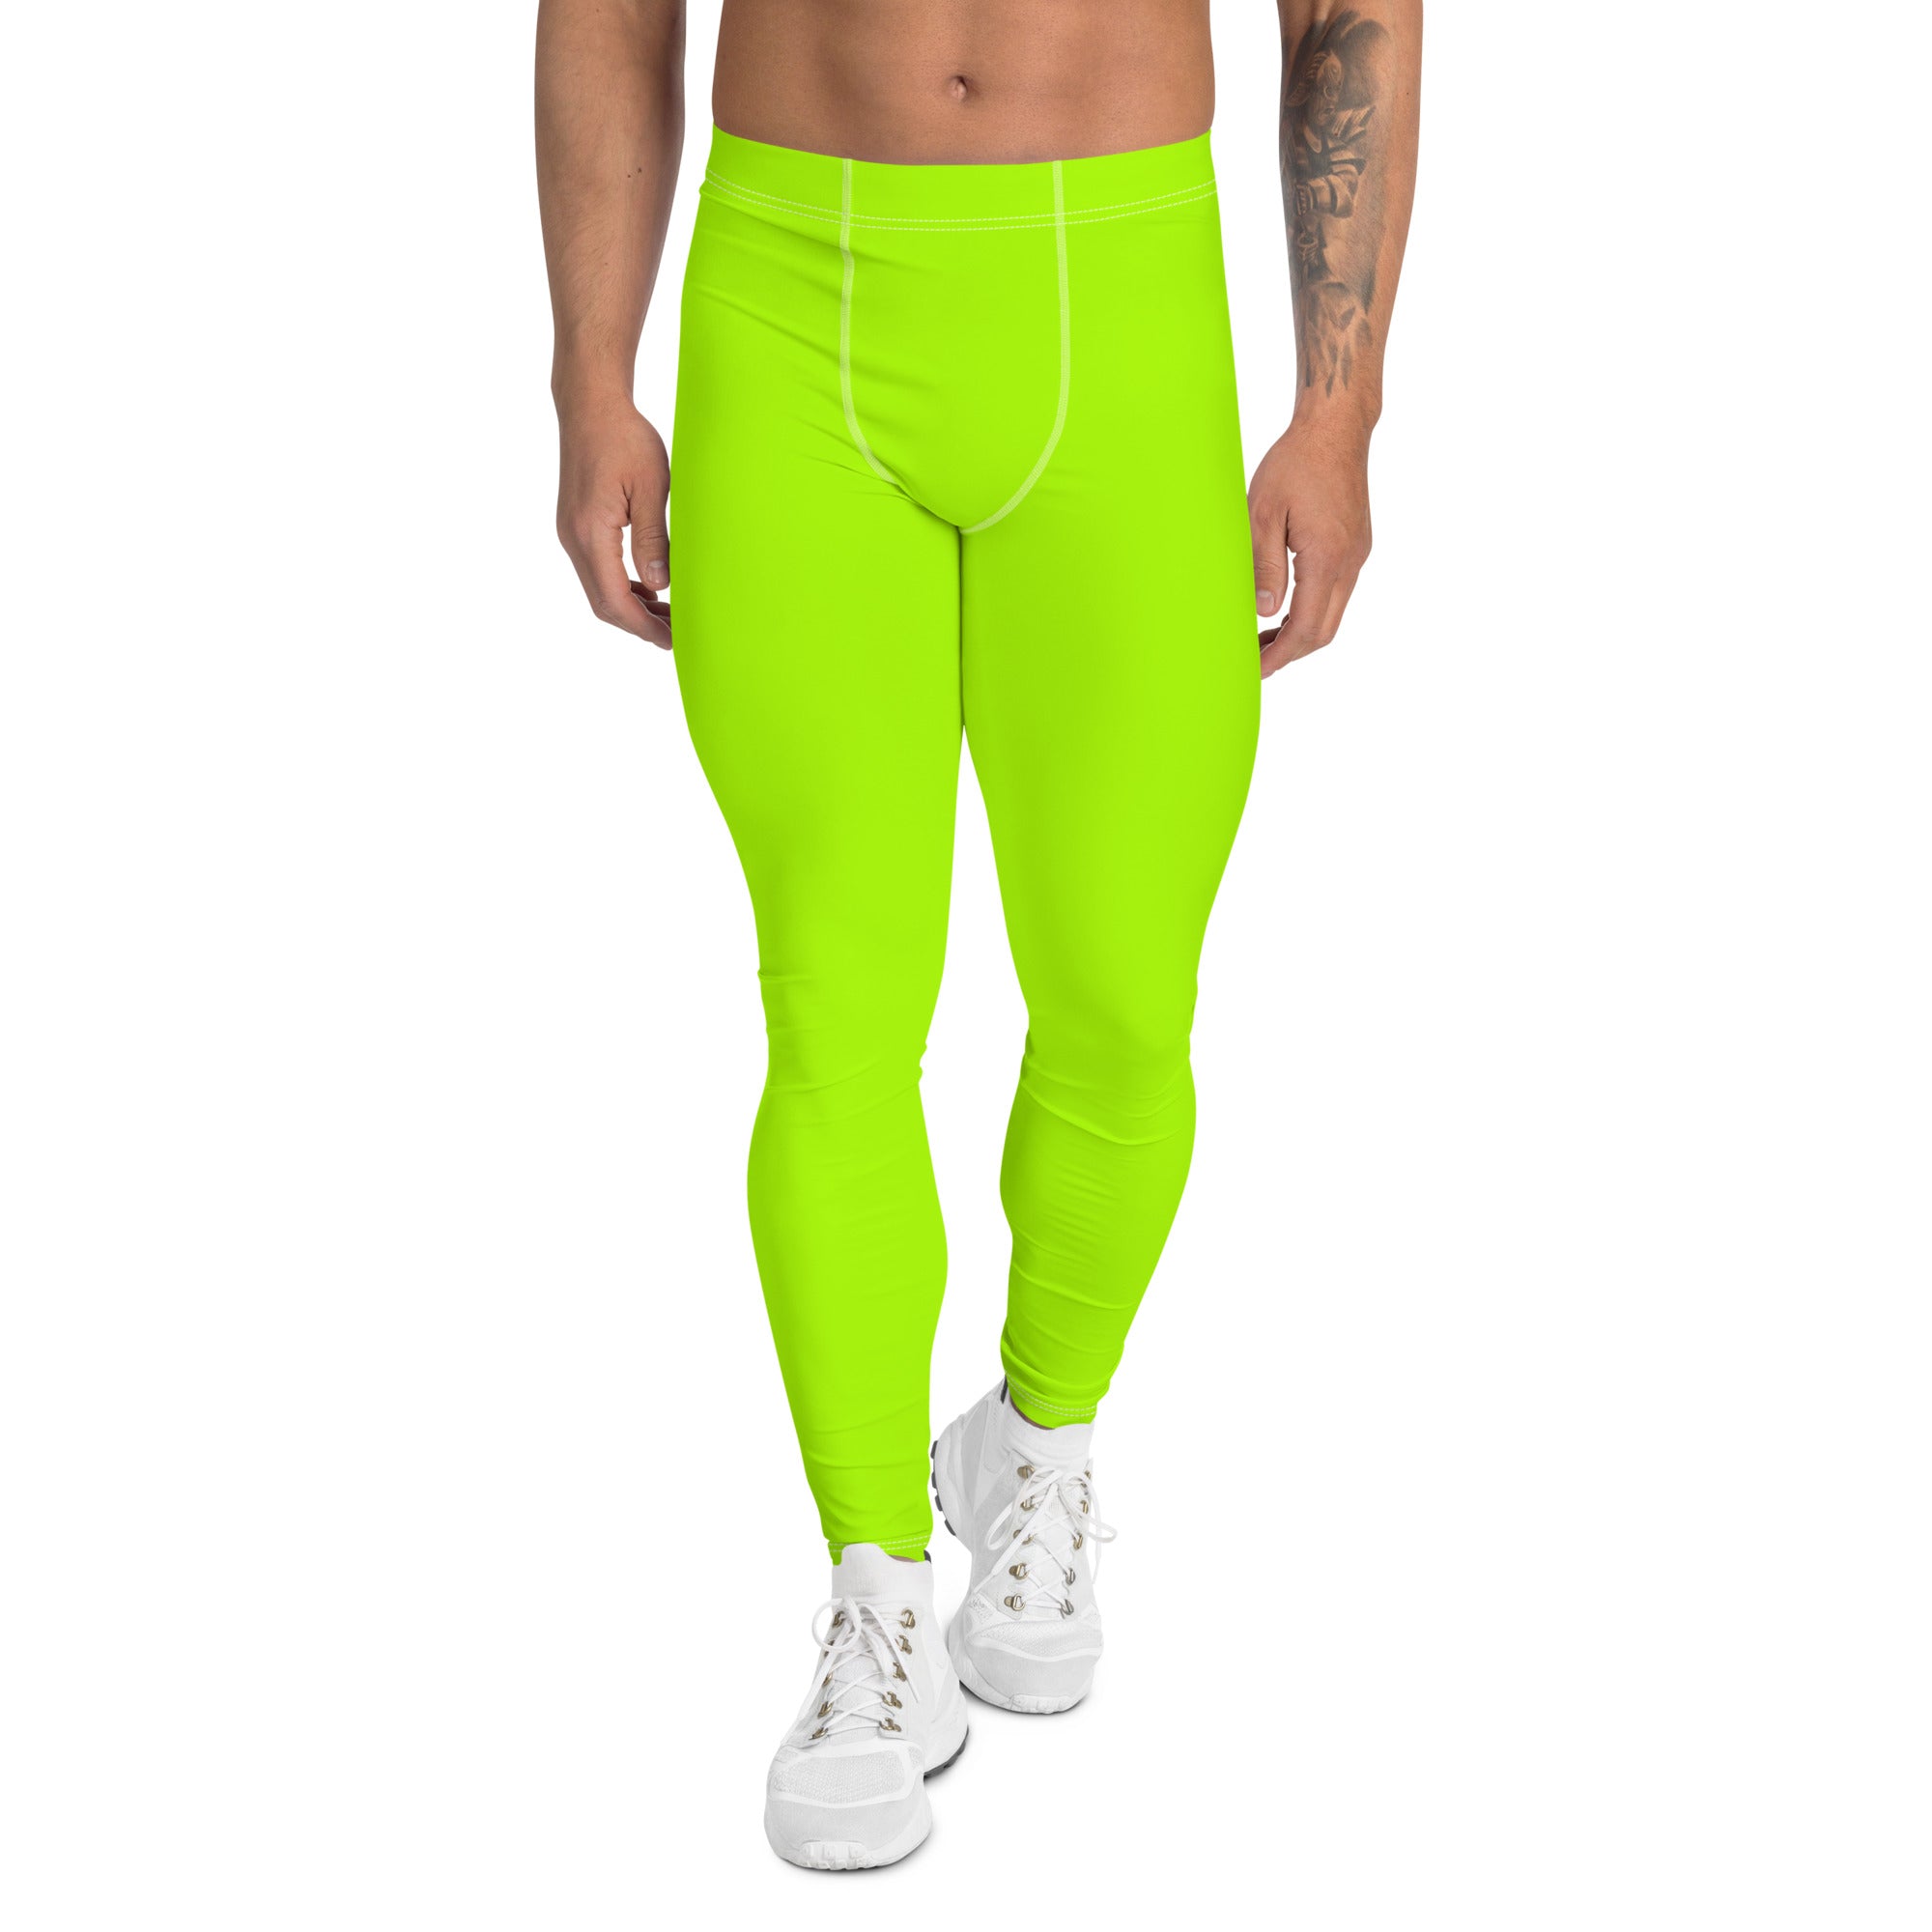 Neon Green Best Men's Leggings, Solid Bright Green Color Men's Running  Sports Gym Tights